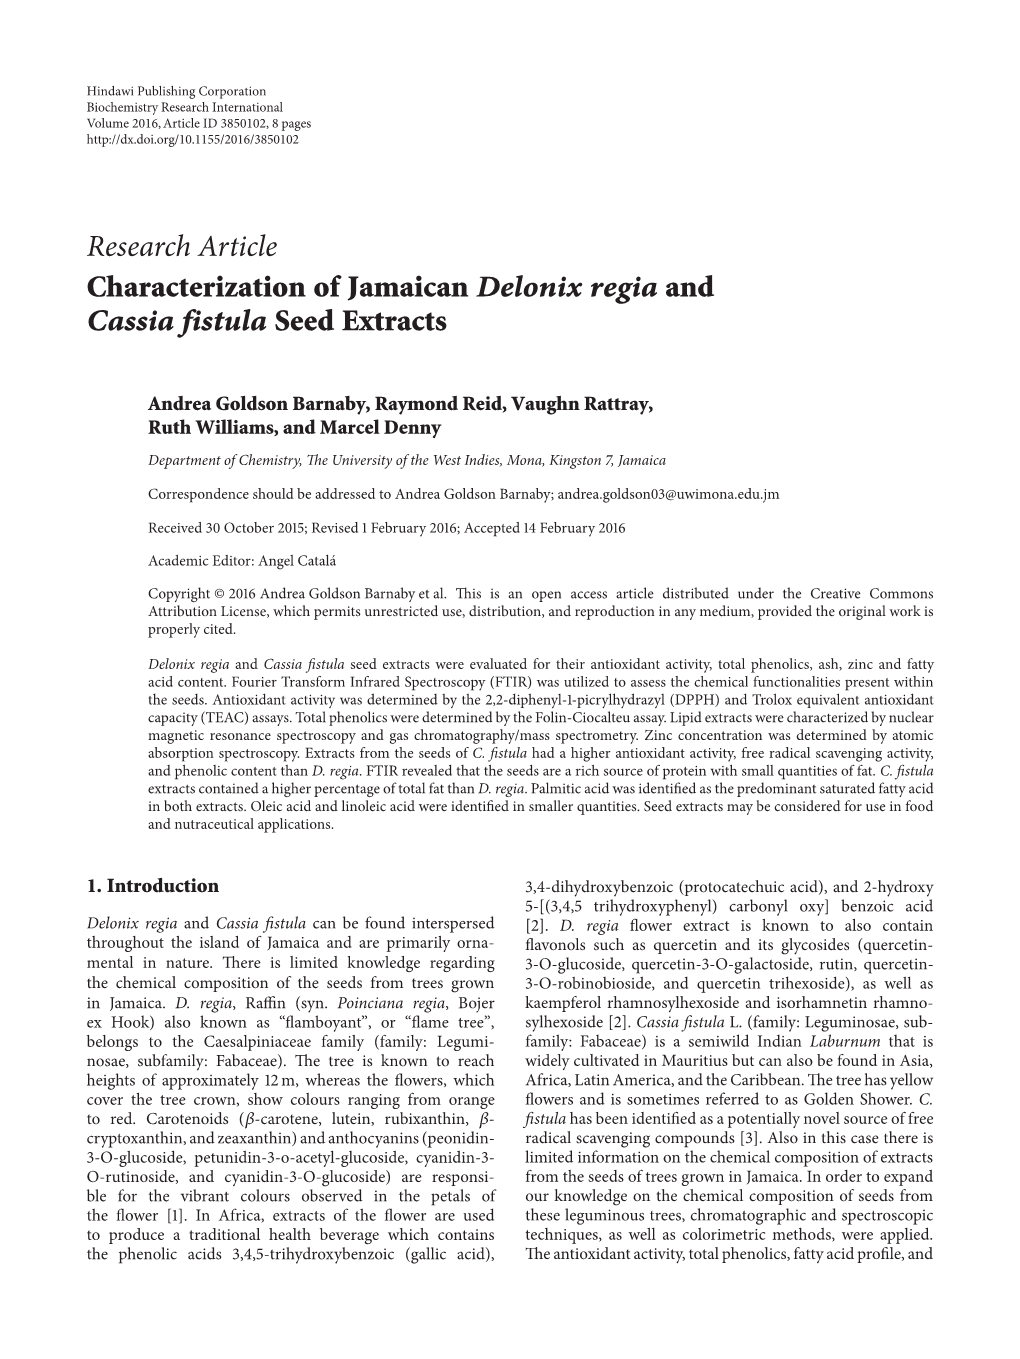 Characterization of Jamaican Delonix Regia and Cassia Fistula Seed Extracts